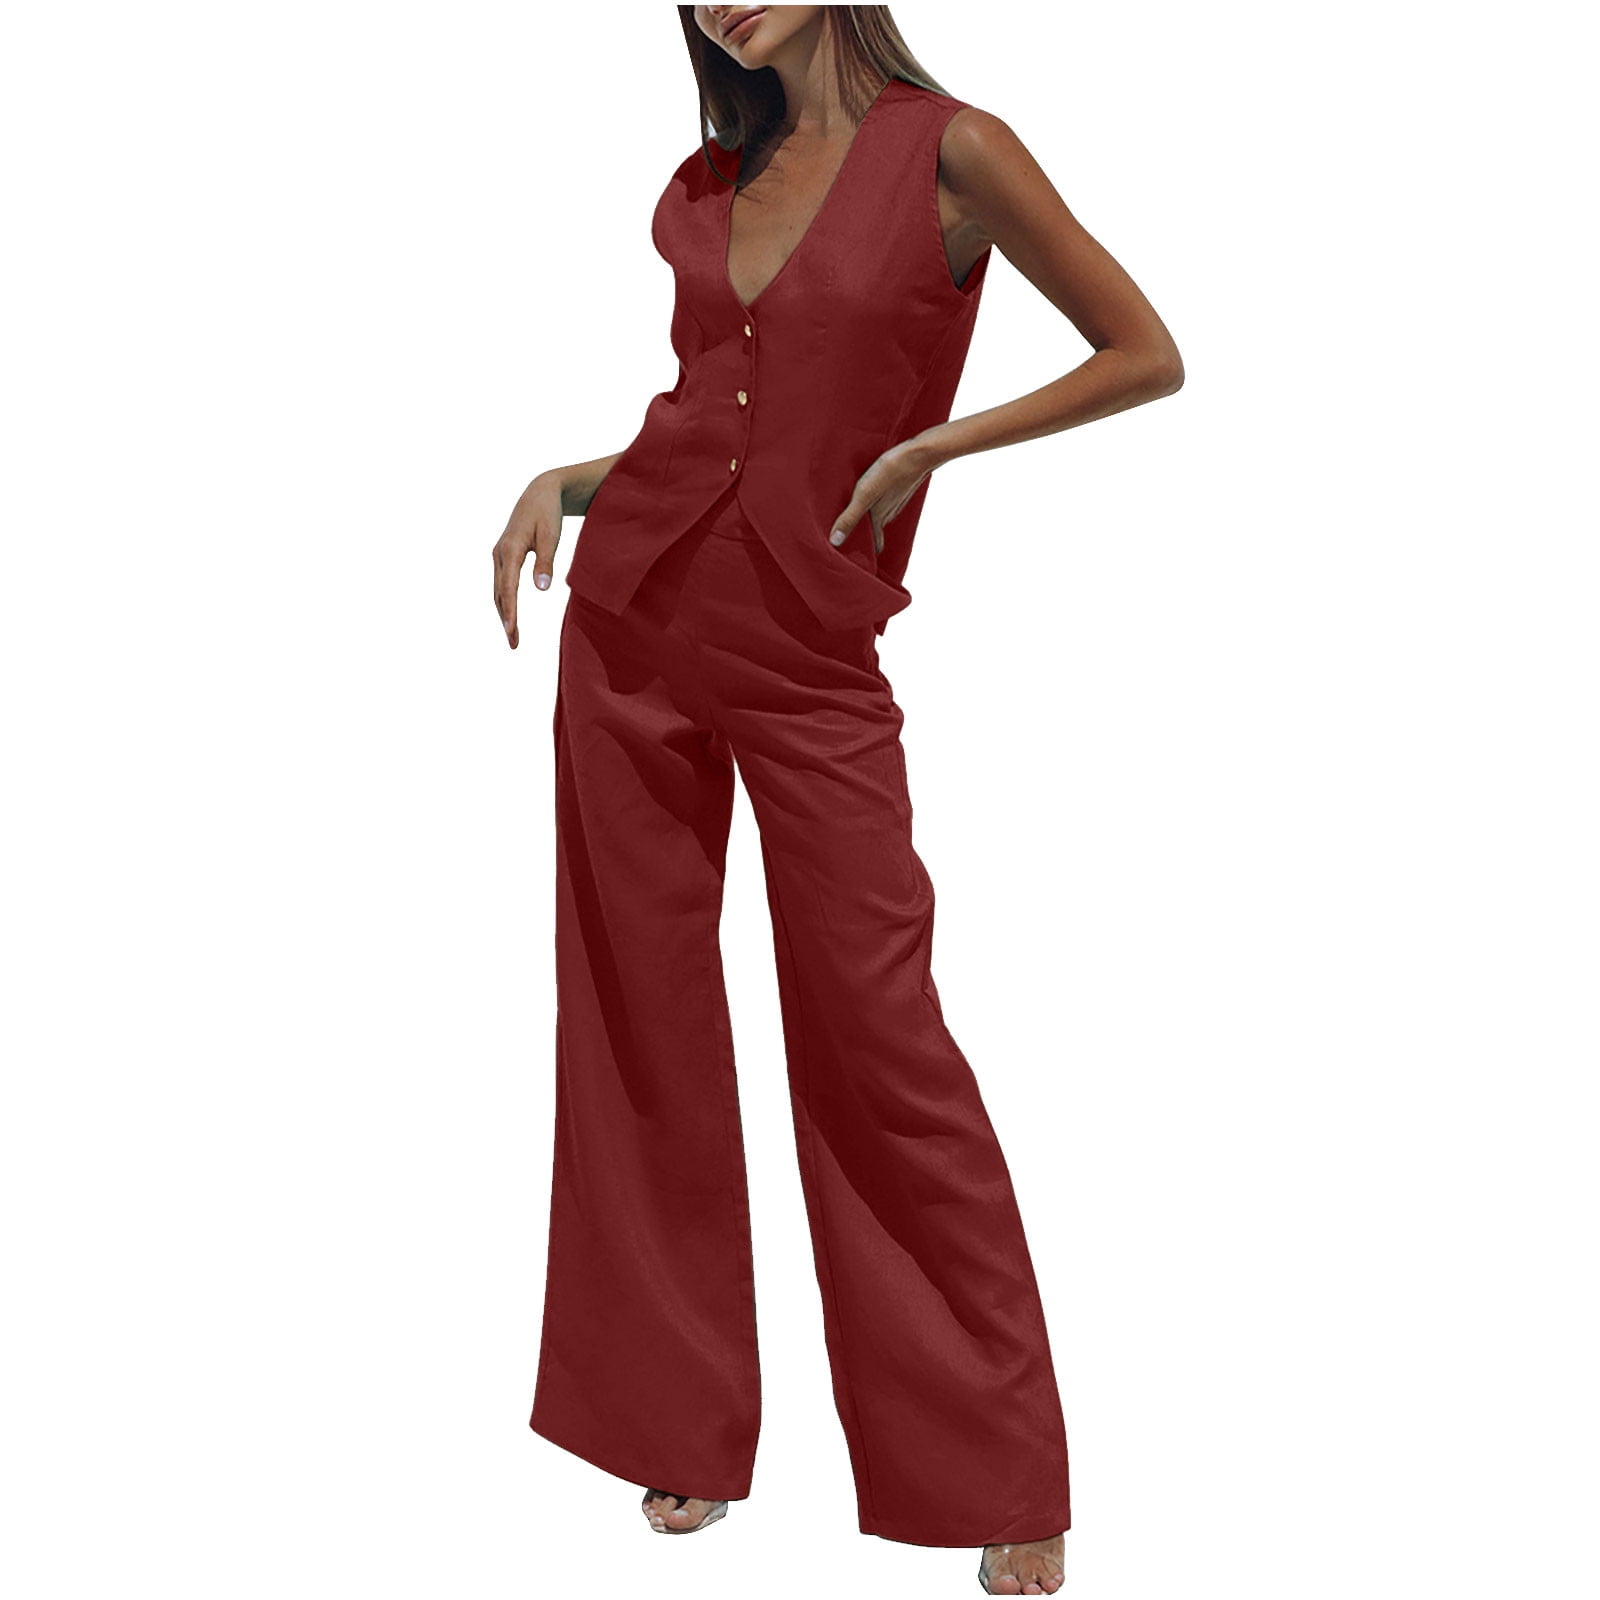 REORIAFEE Women's Two Piece Sports Outfit Tracksuit Jogger Sets Summer  Sports Yoga Sets 90s Themed Party Outfits Women's Two Piece Cotton Linen  Short Sleeve V Neck Tops Pants Set Wine S 